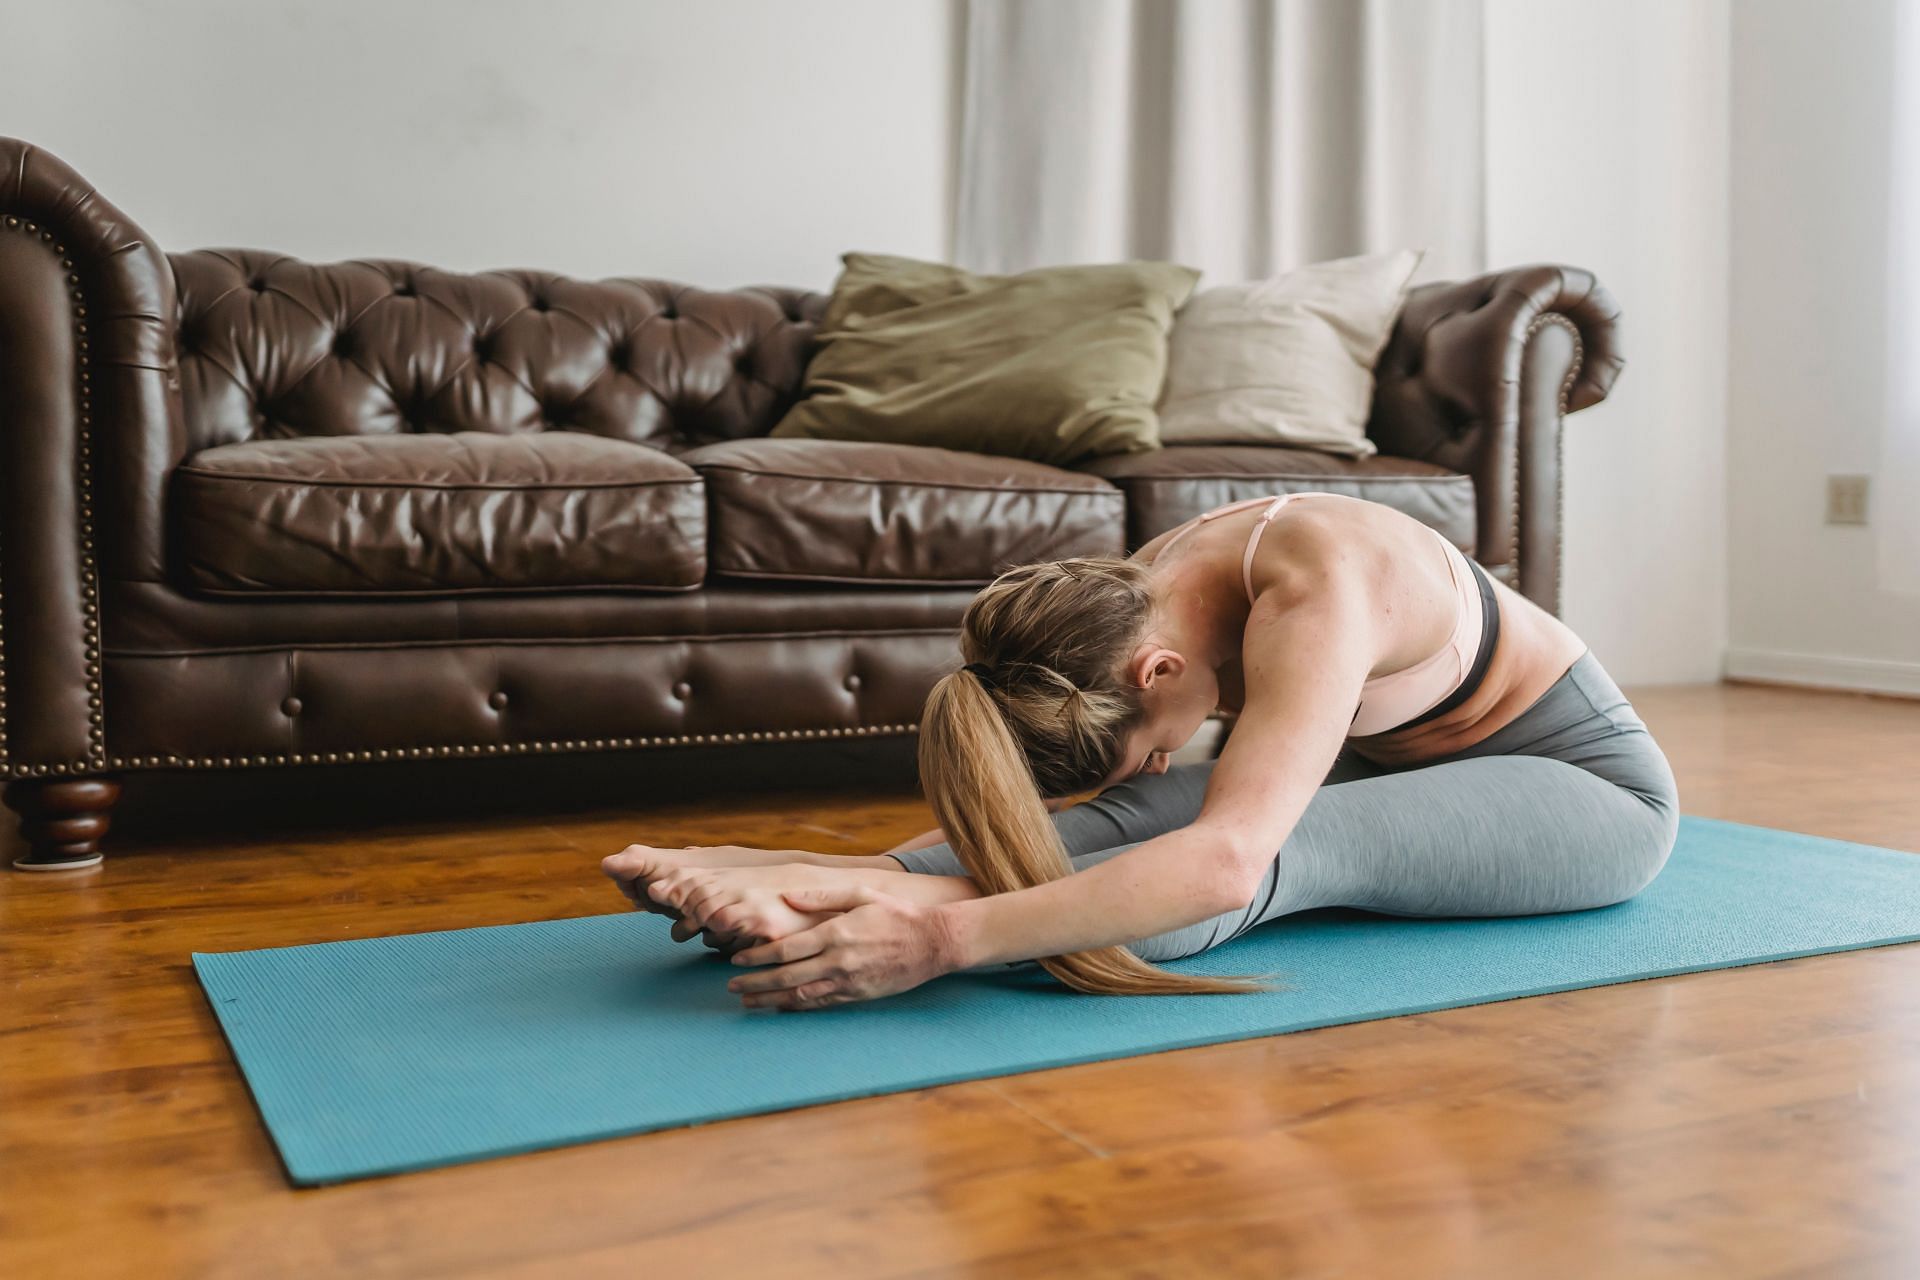 Best and effective yoga exercises you can do at home to lose weight. (Image via Pexels/Marta Wave)